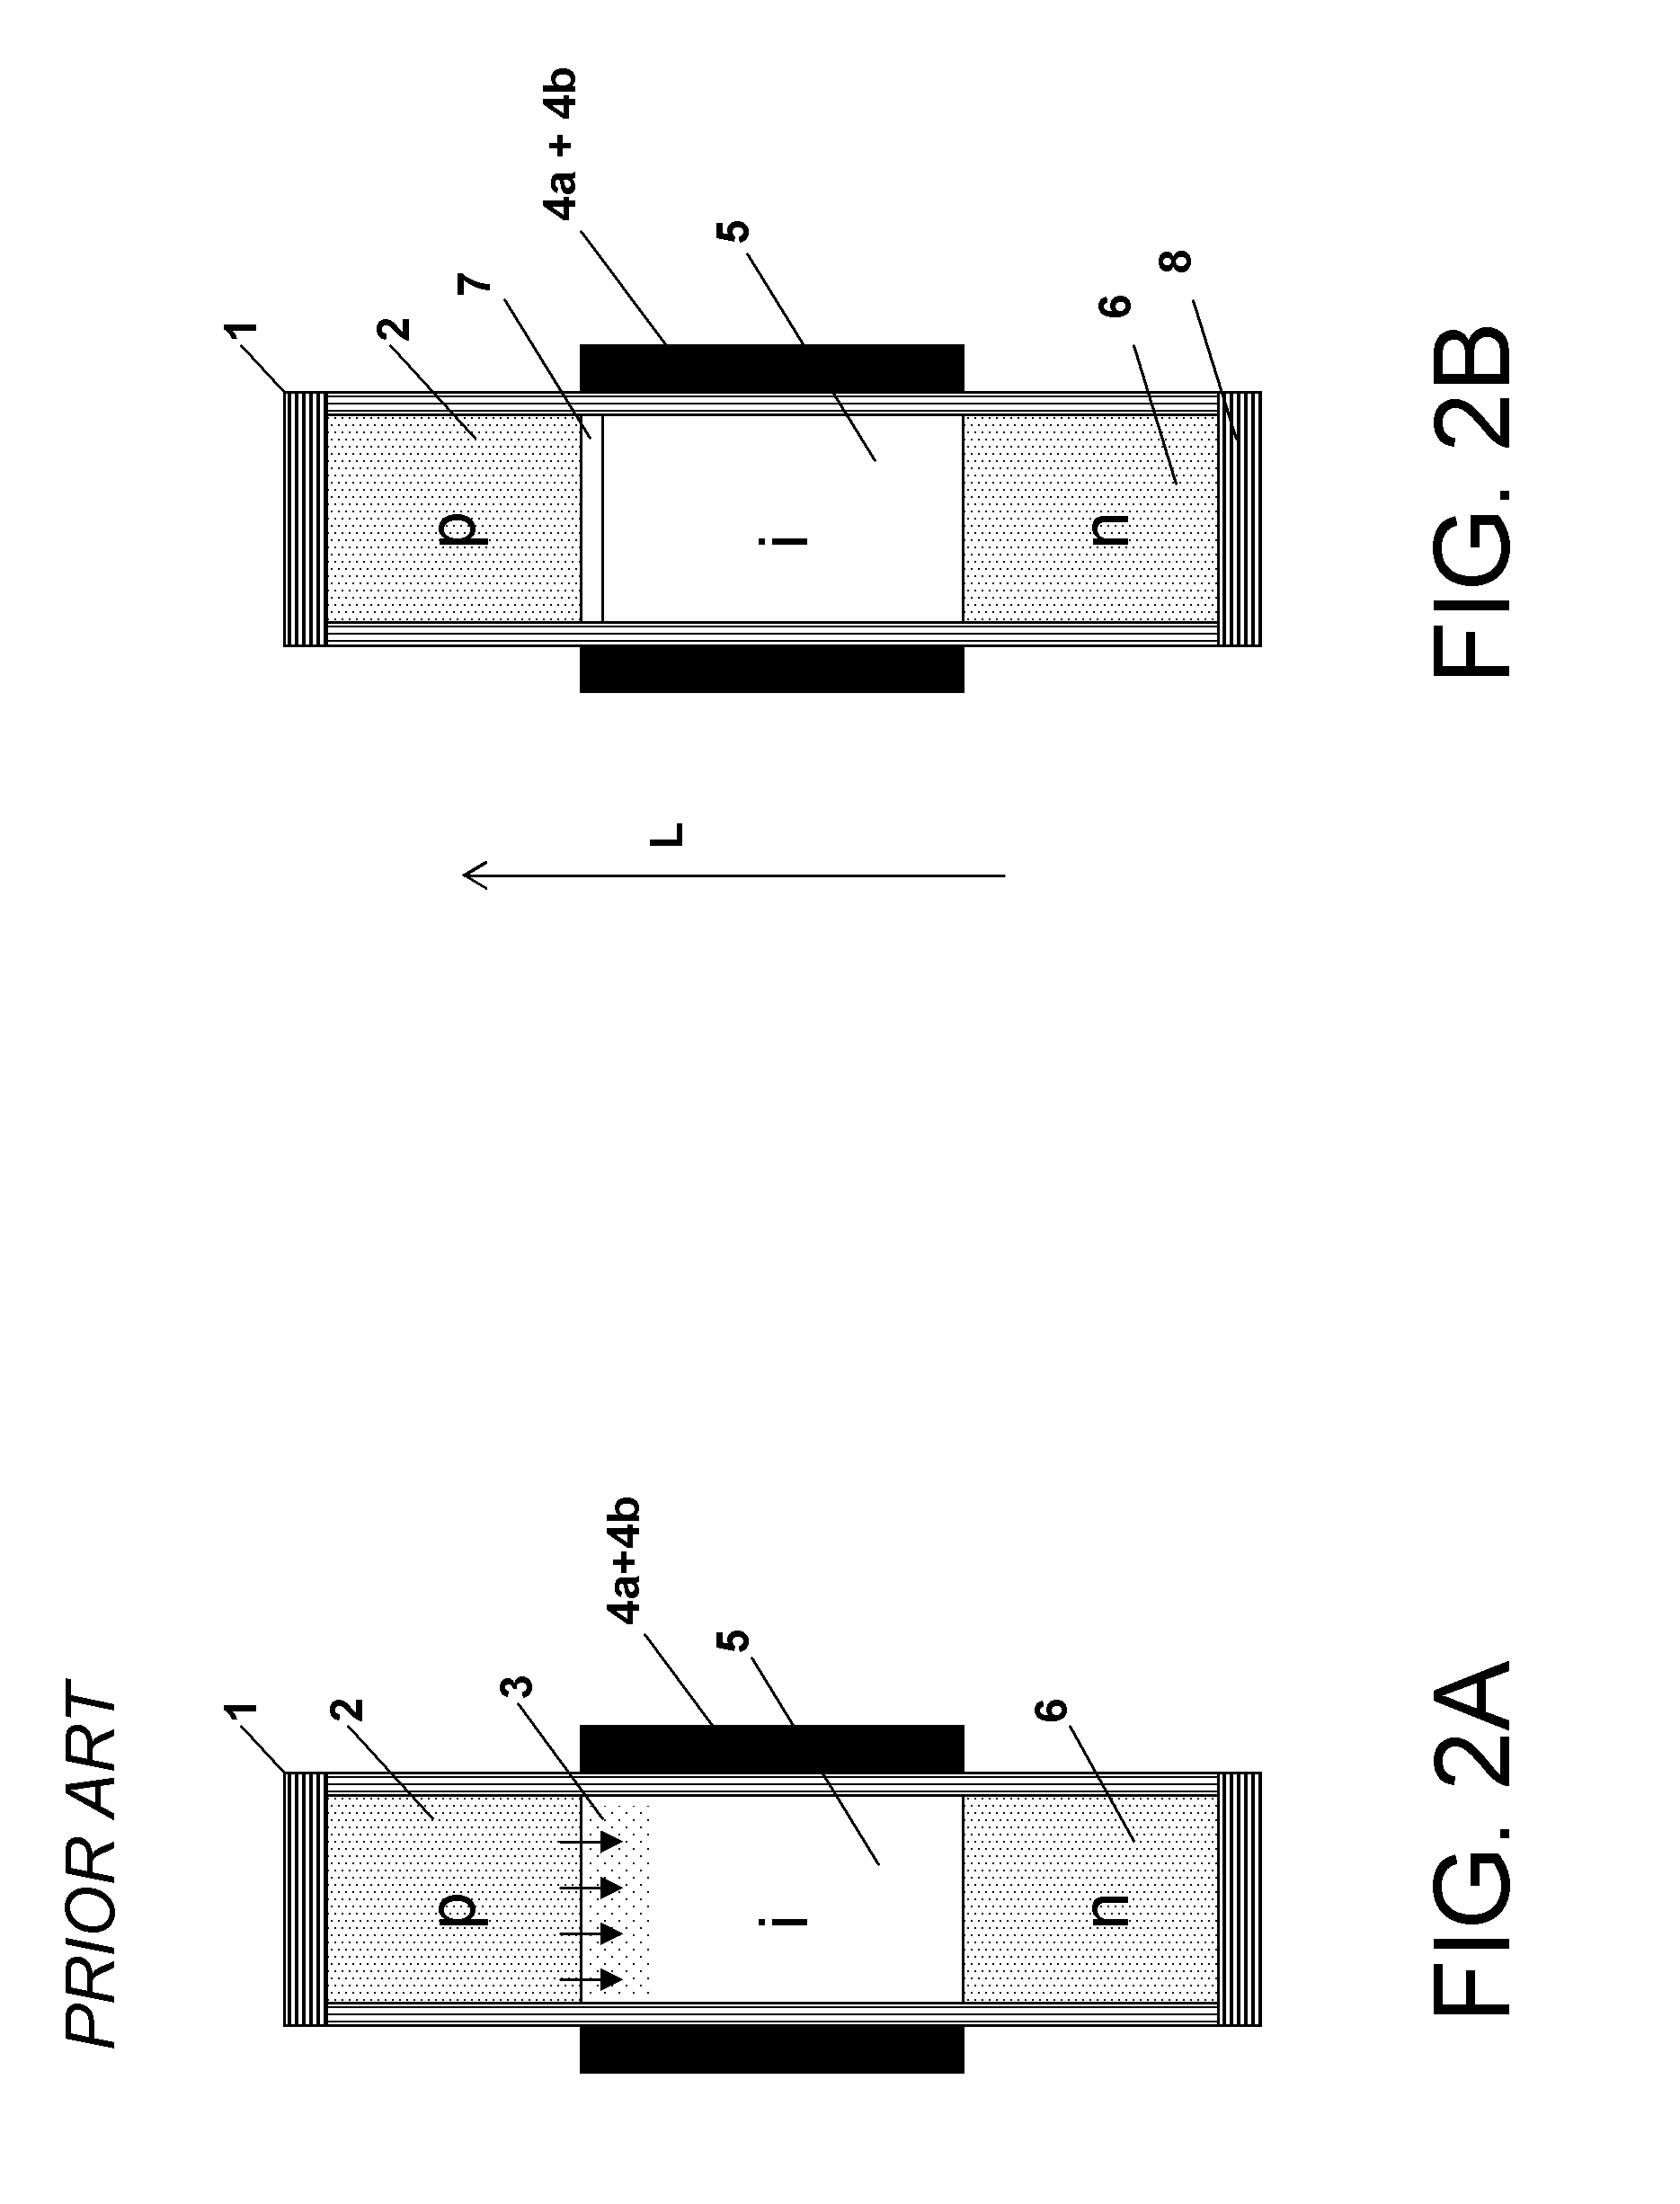 Control of tunneling junction in a hetero tunnel field effect transistor